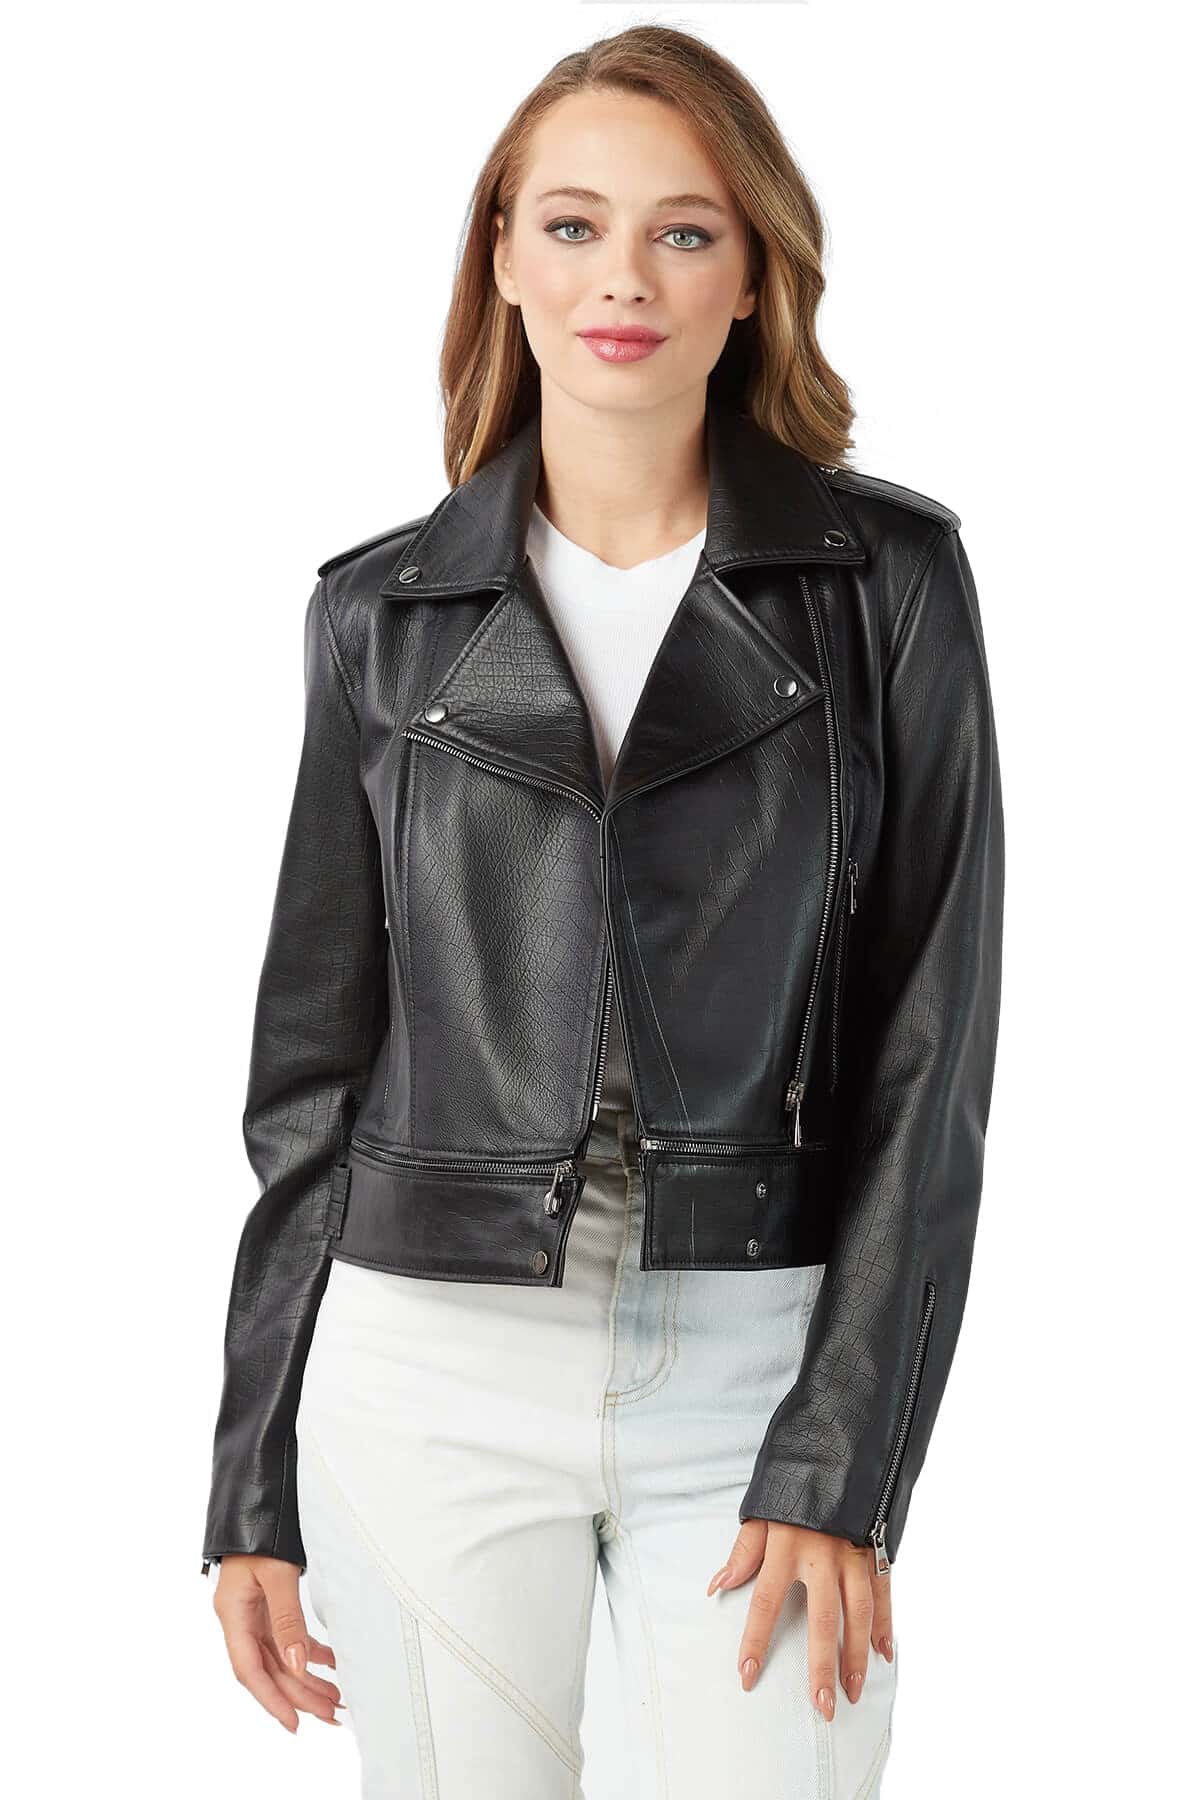 Sommer Ray Women's 100 % Real Black Leather Slim-Fit Modern Jacket